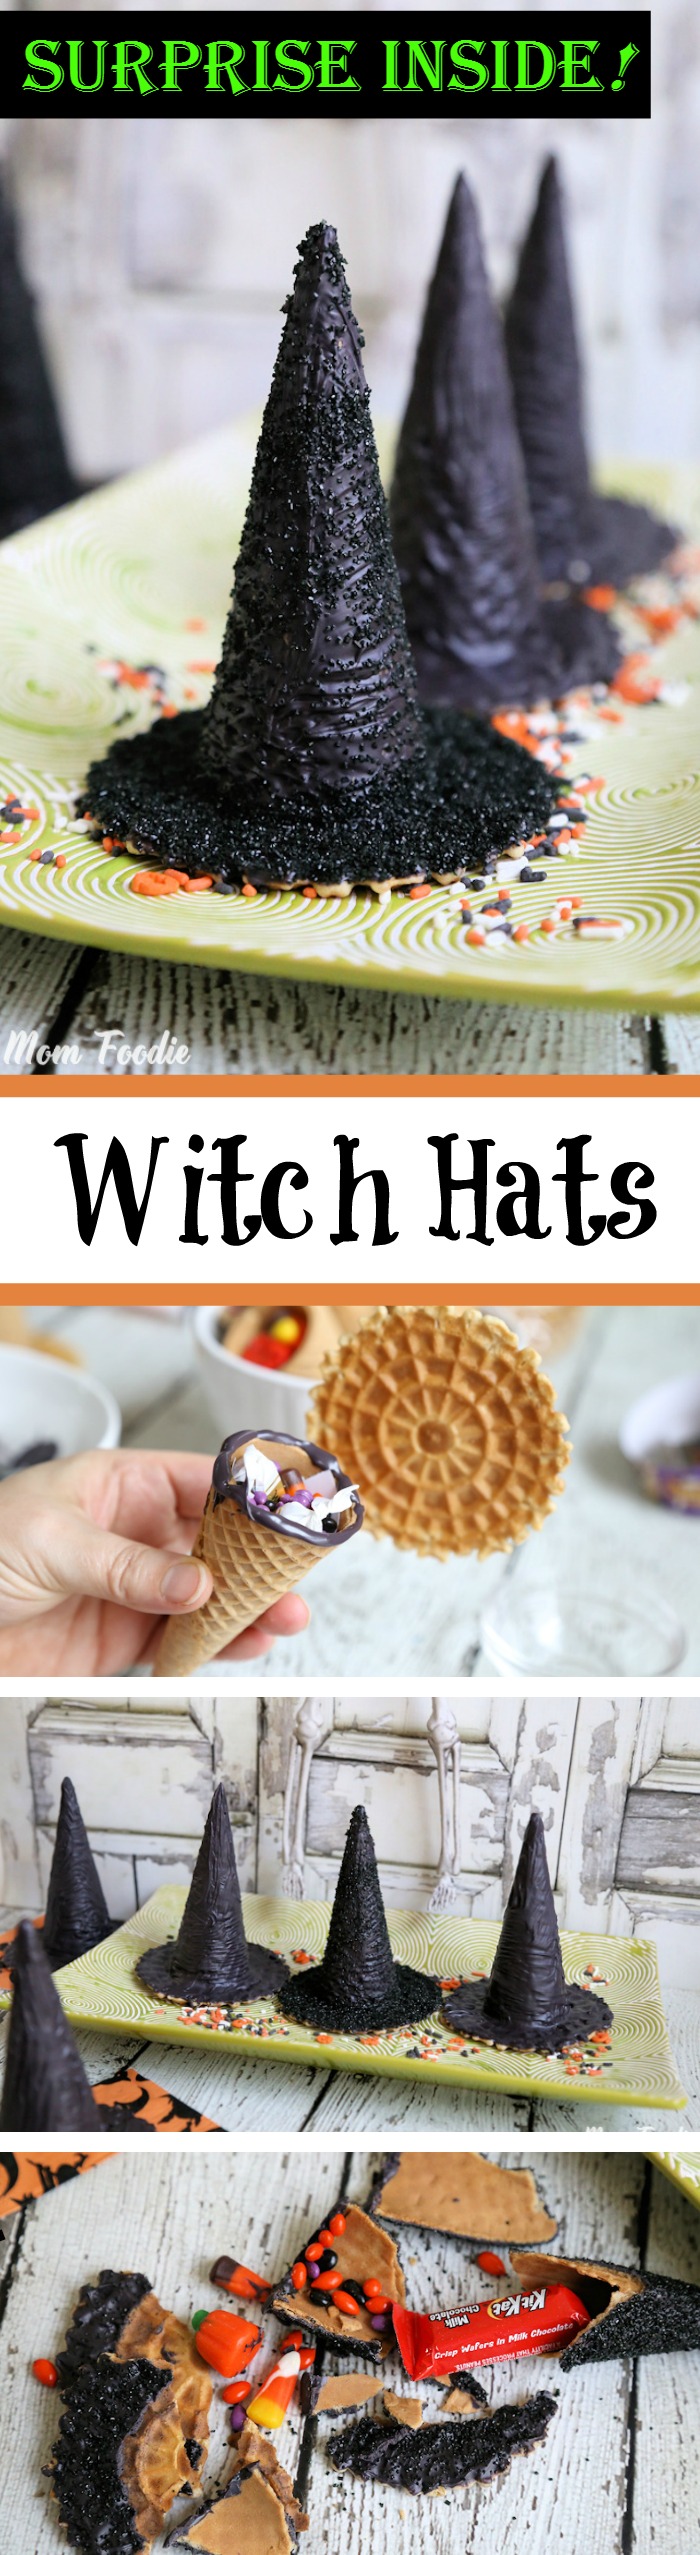 Surprise Inside Edible Witch Hats Treat Containers Tutorial